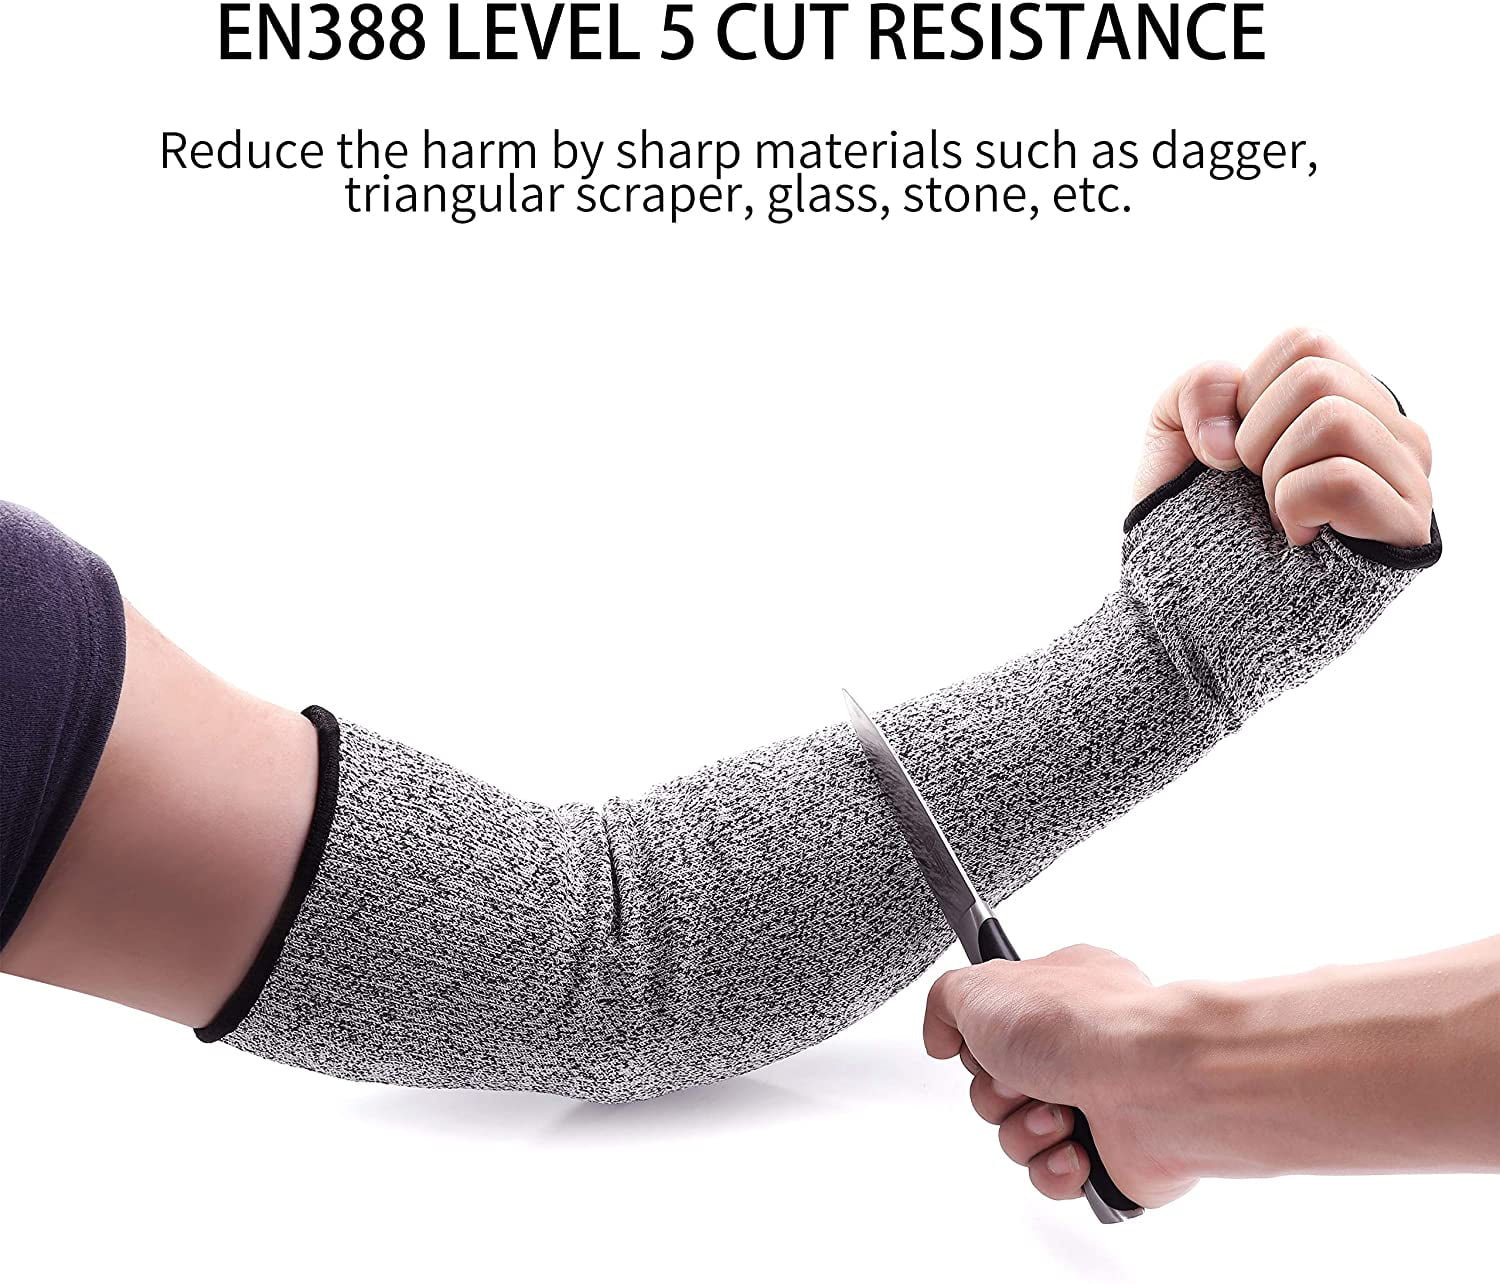 Arm Protectors for Thin Skin Safety 2 Pairs Cut Resistant Sleeves ...